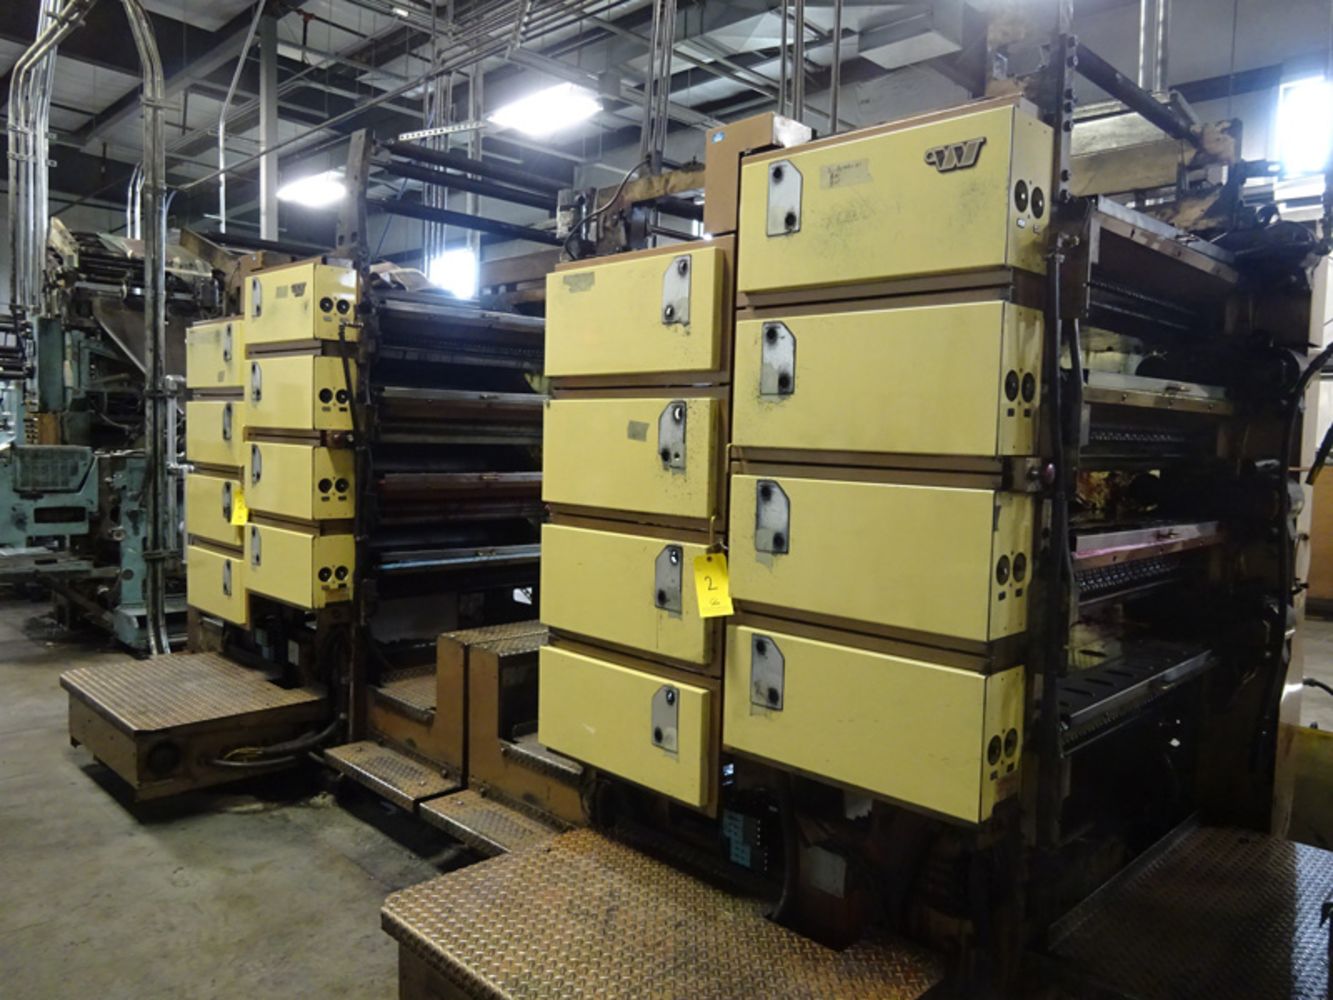 Surplus Assets of Lakeway Publishers – A Coldset Newspaper Printing & Binding Facility